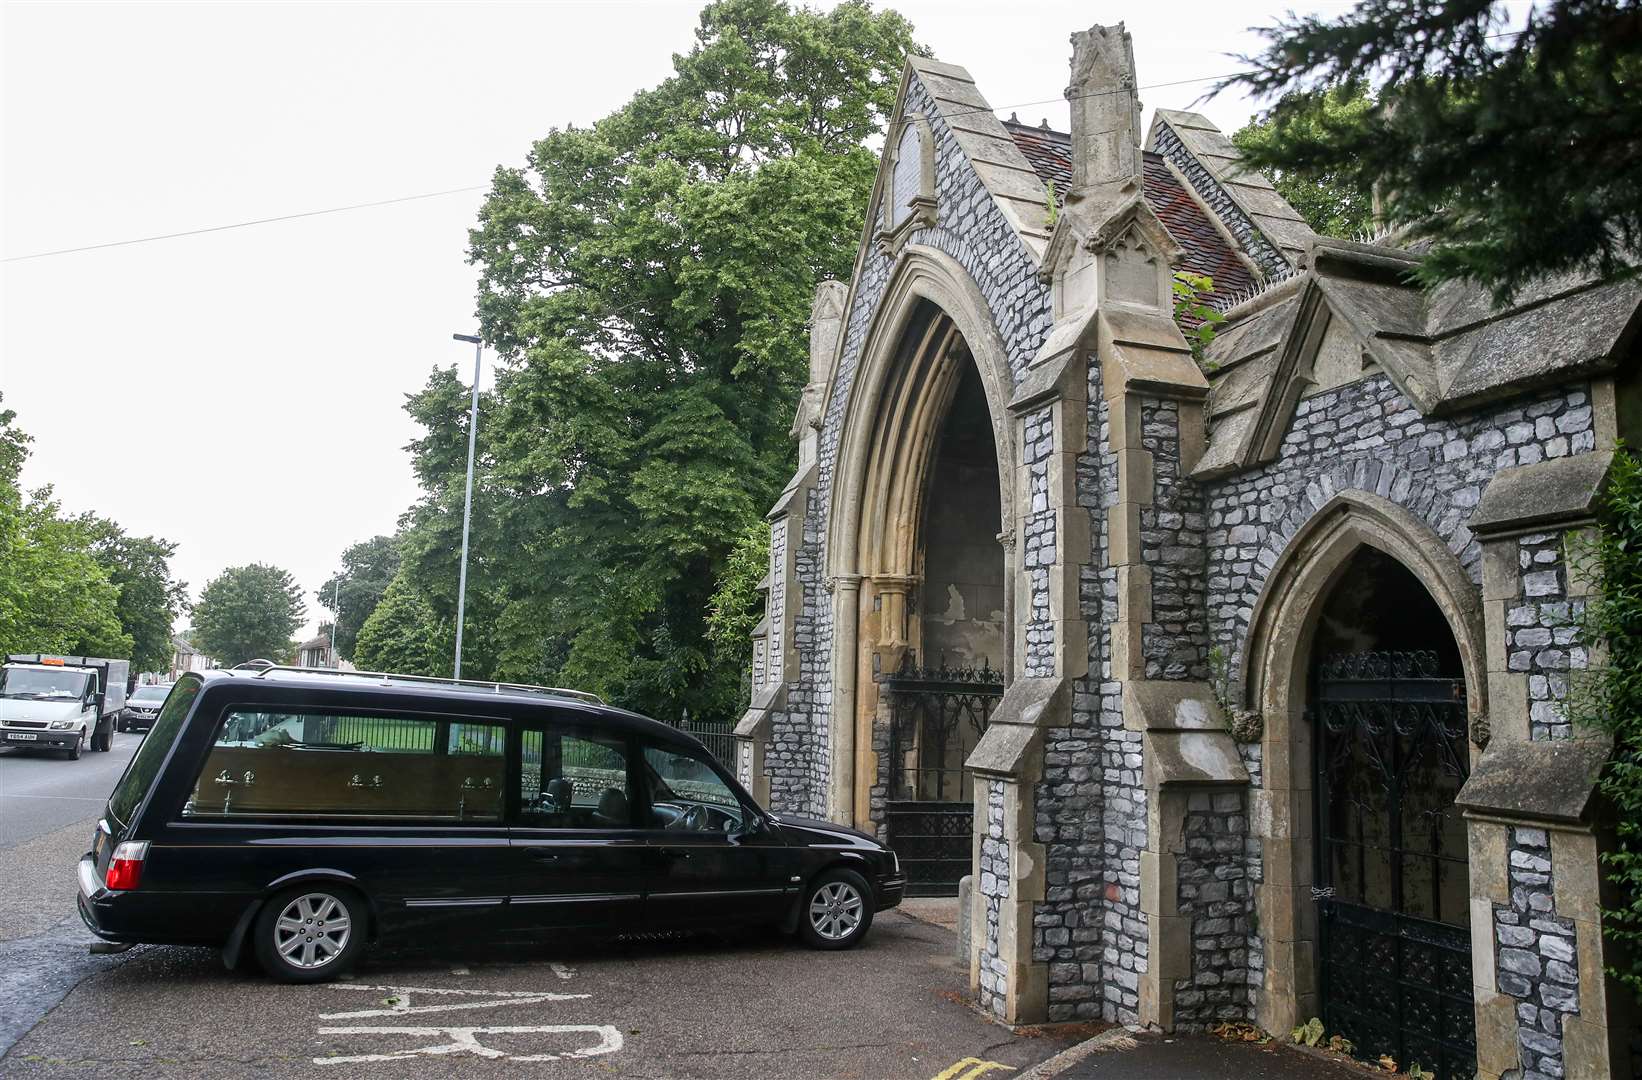 A hearse carrying the coffin of Jeremy Kyle guest Steve Dymond arrives at Kingston Cemetery in Portsmouth (Andrew Matthews/PA)